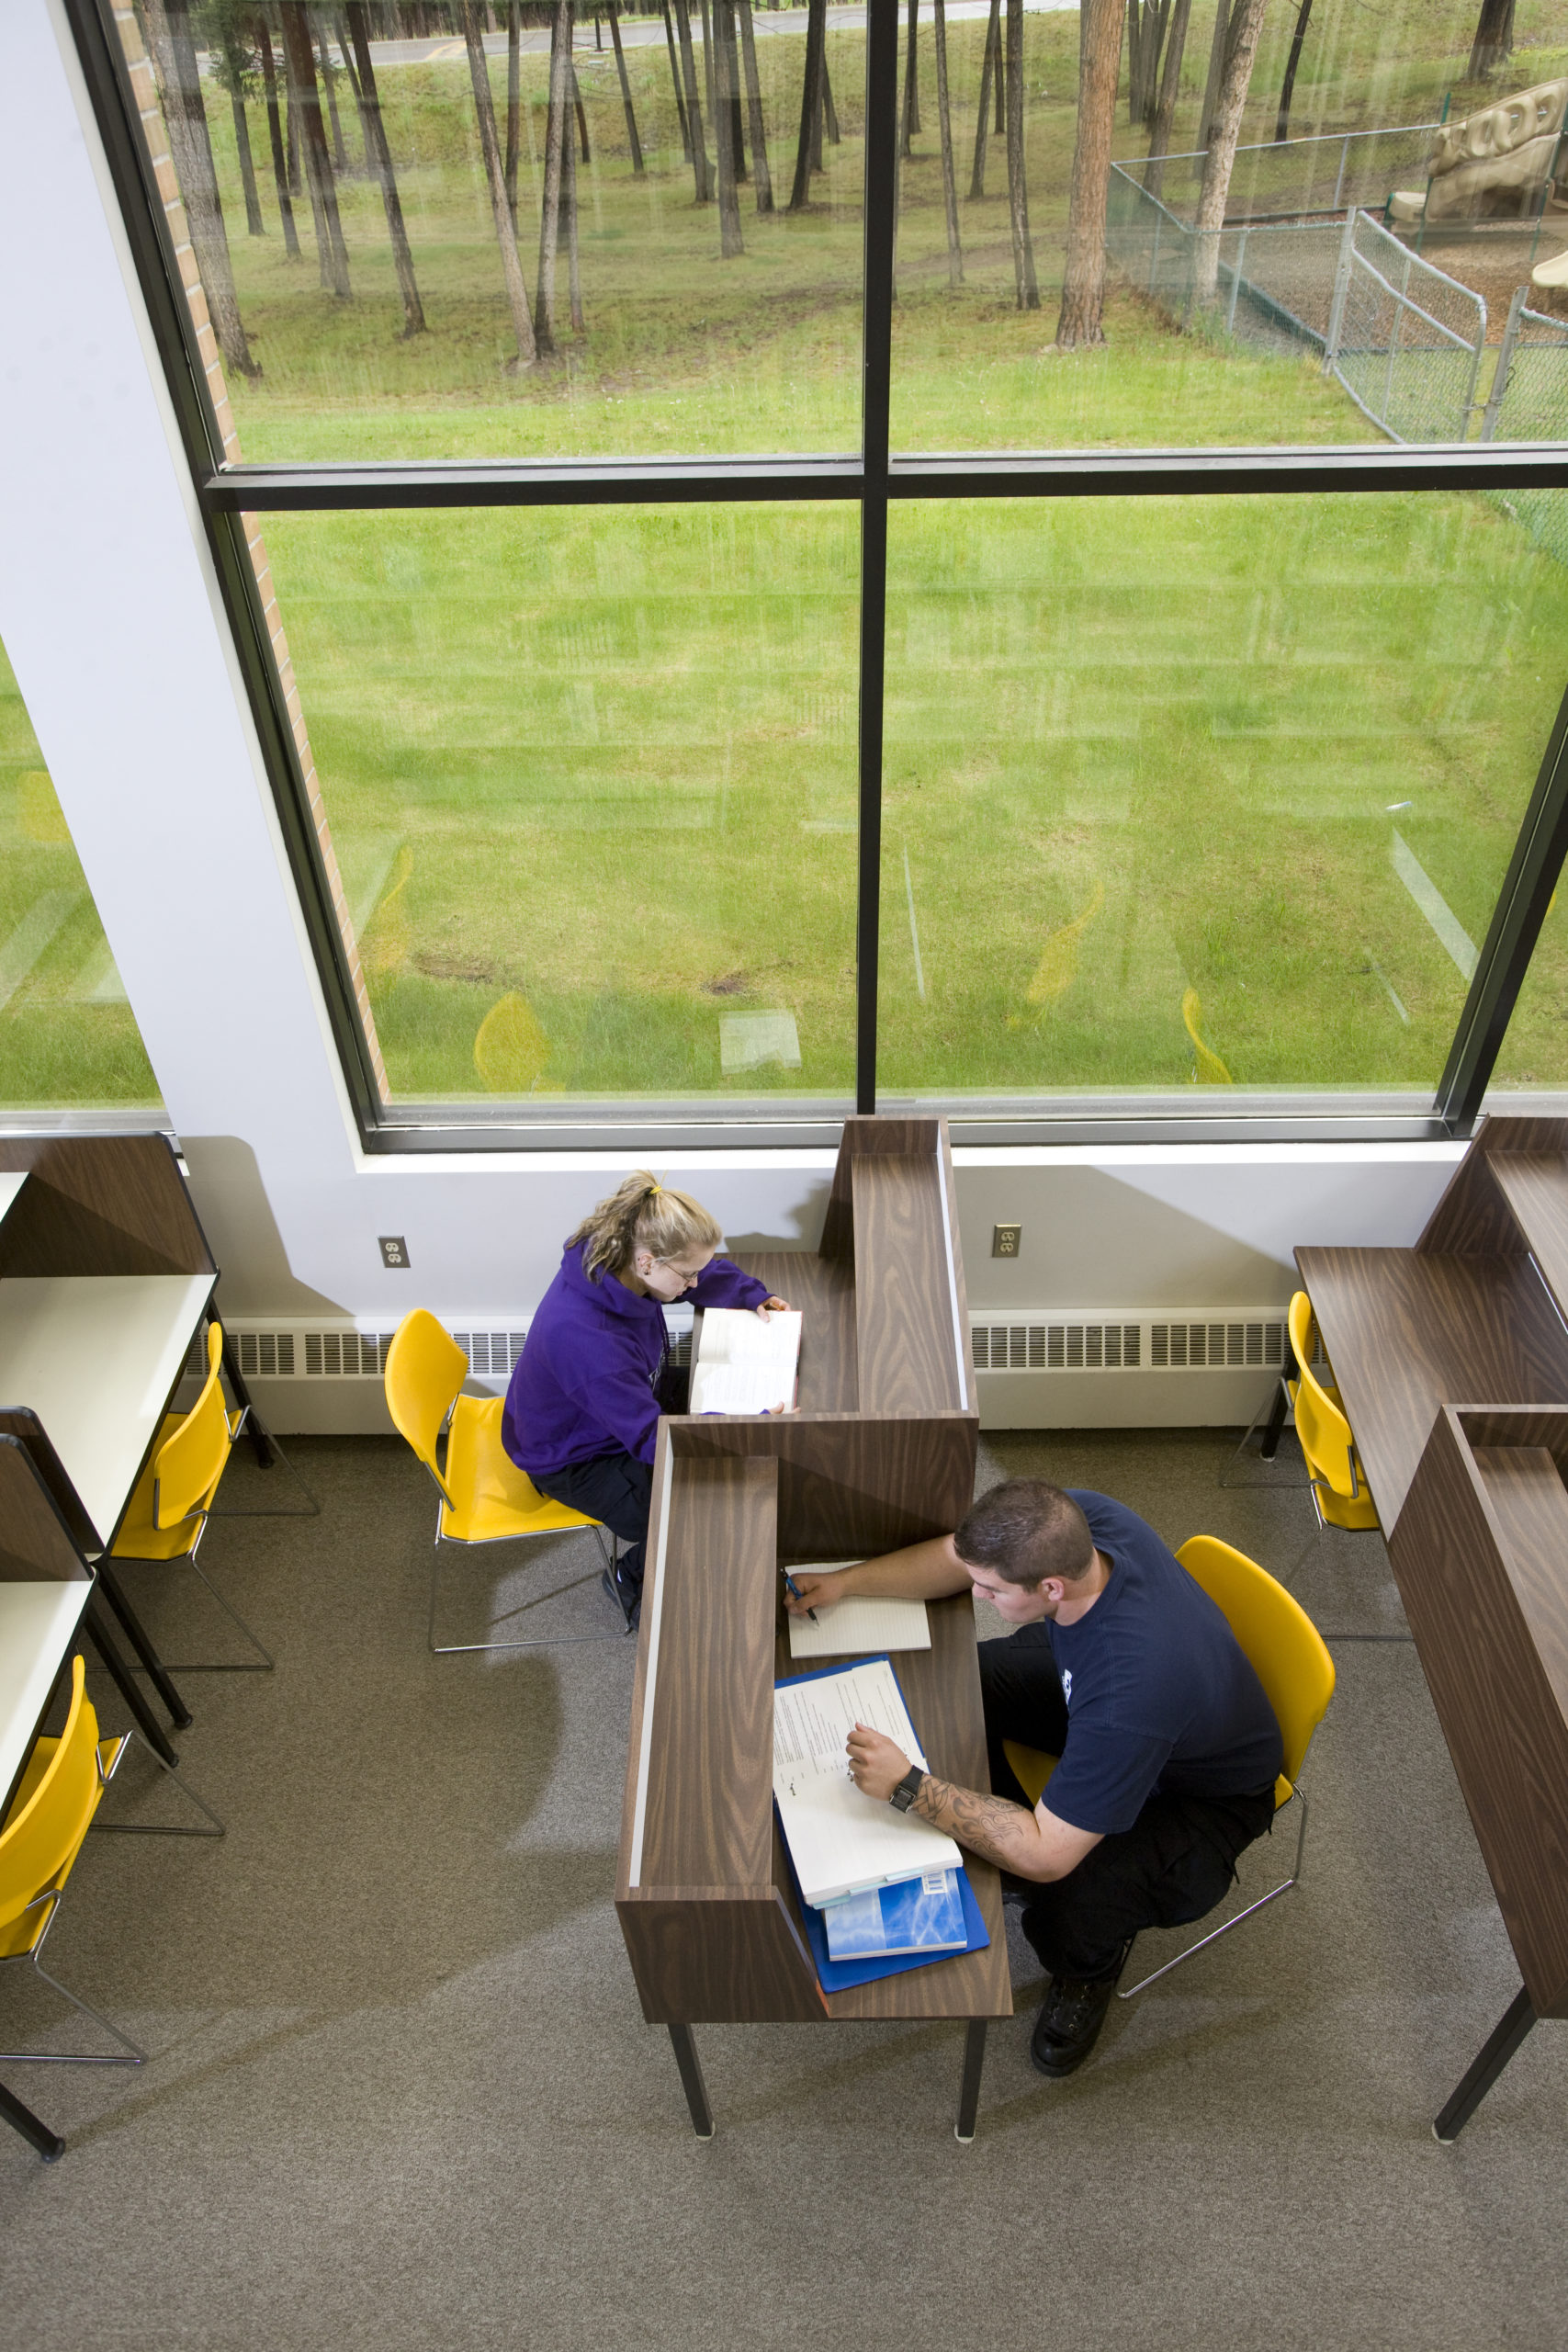 Students study an desks near big windows in the library